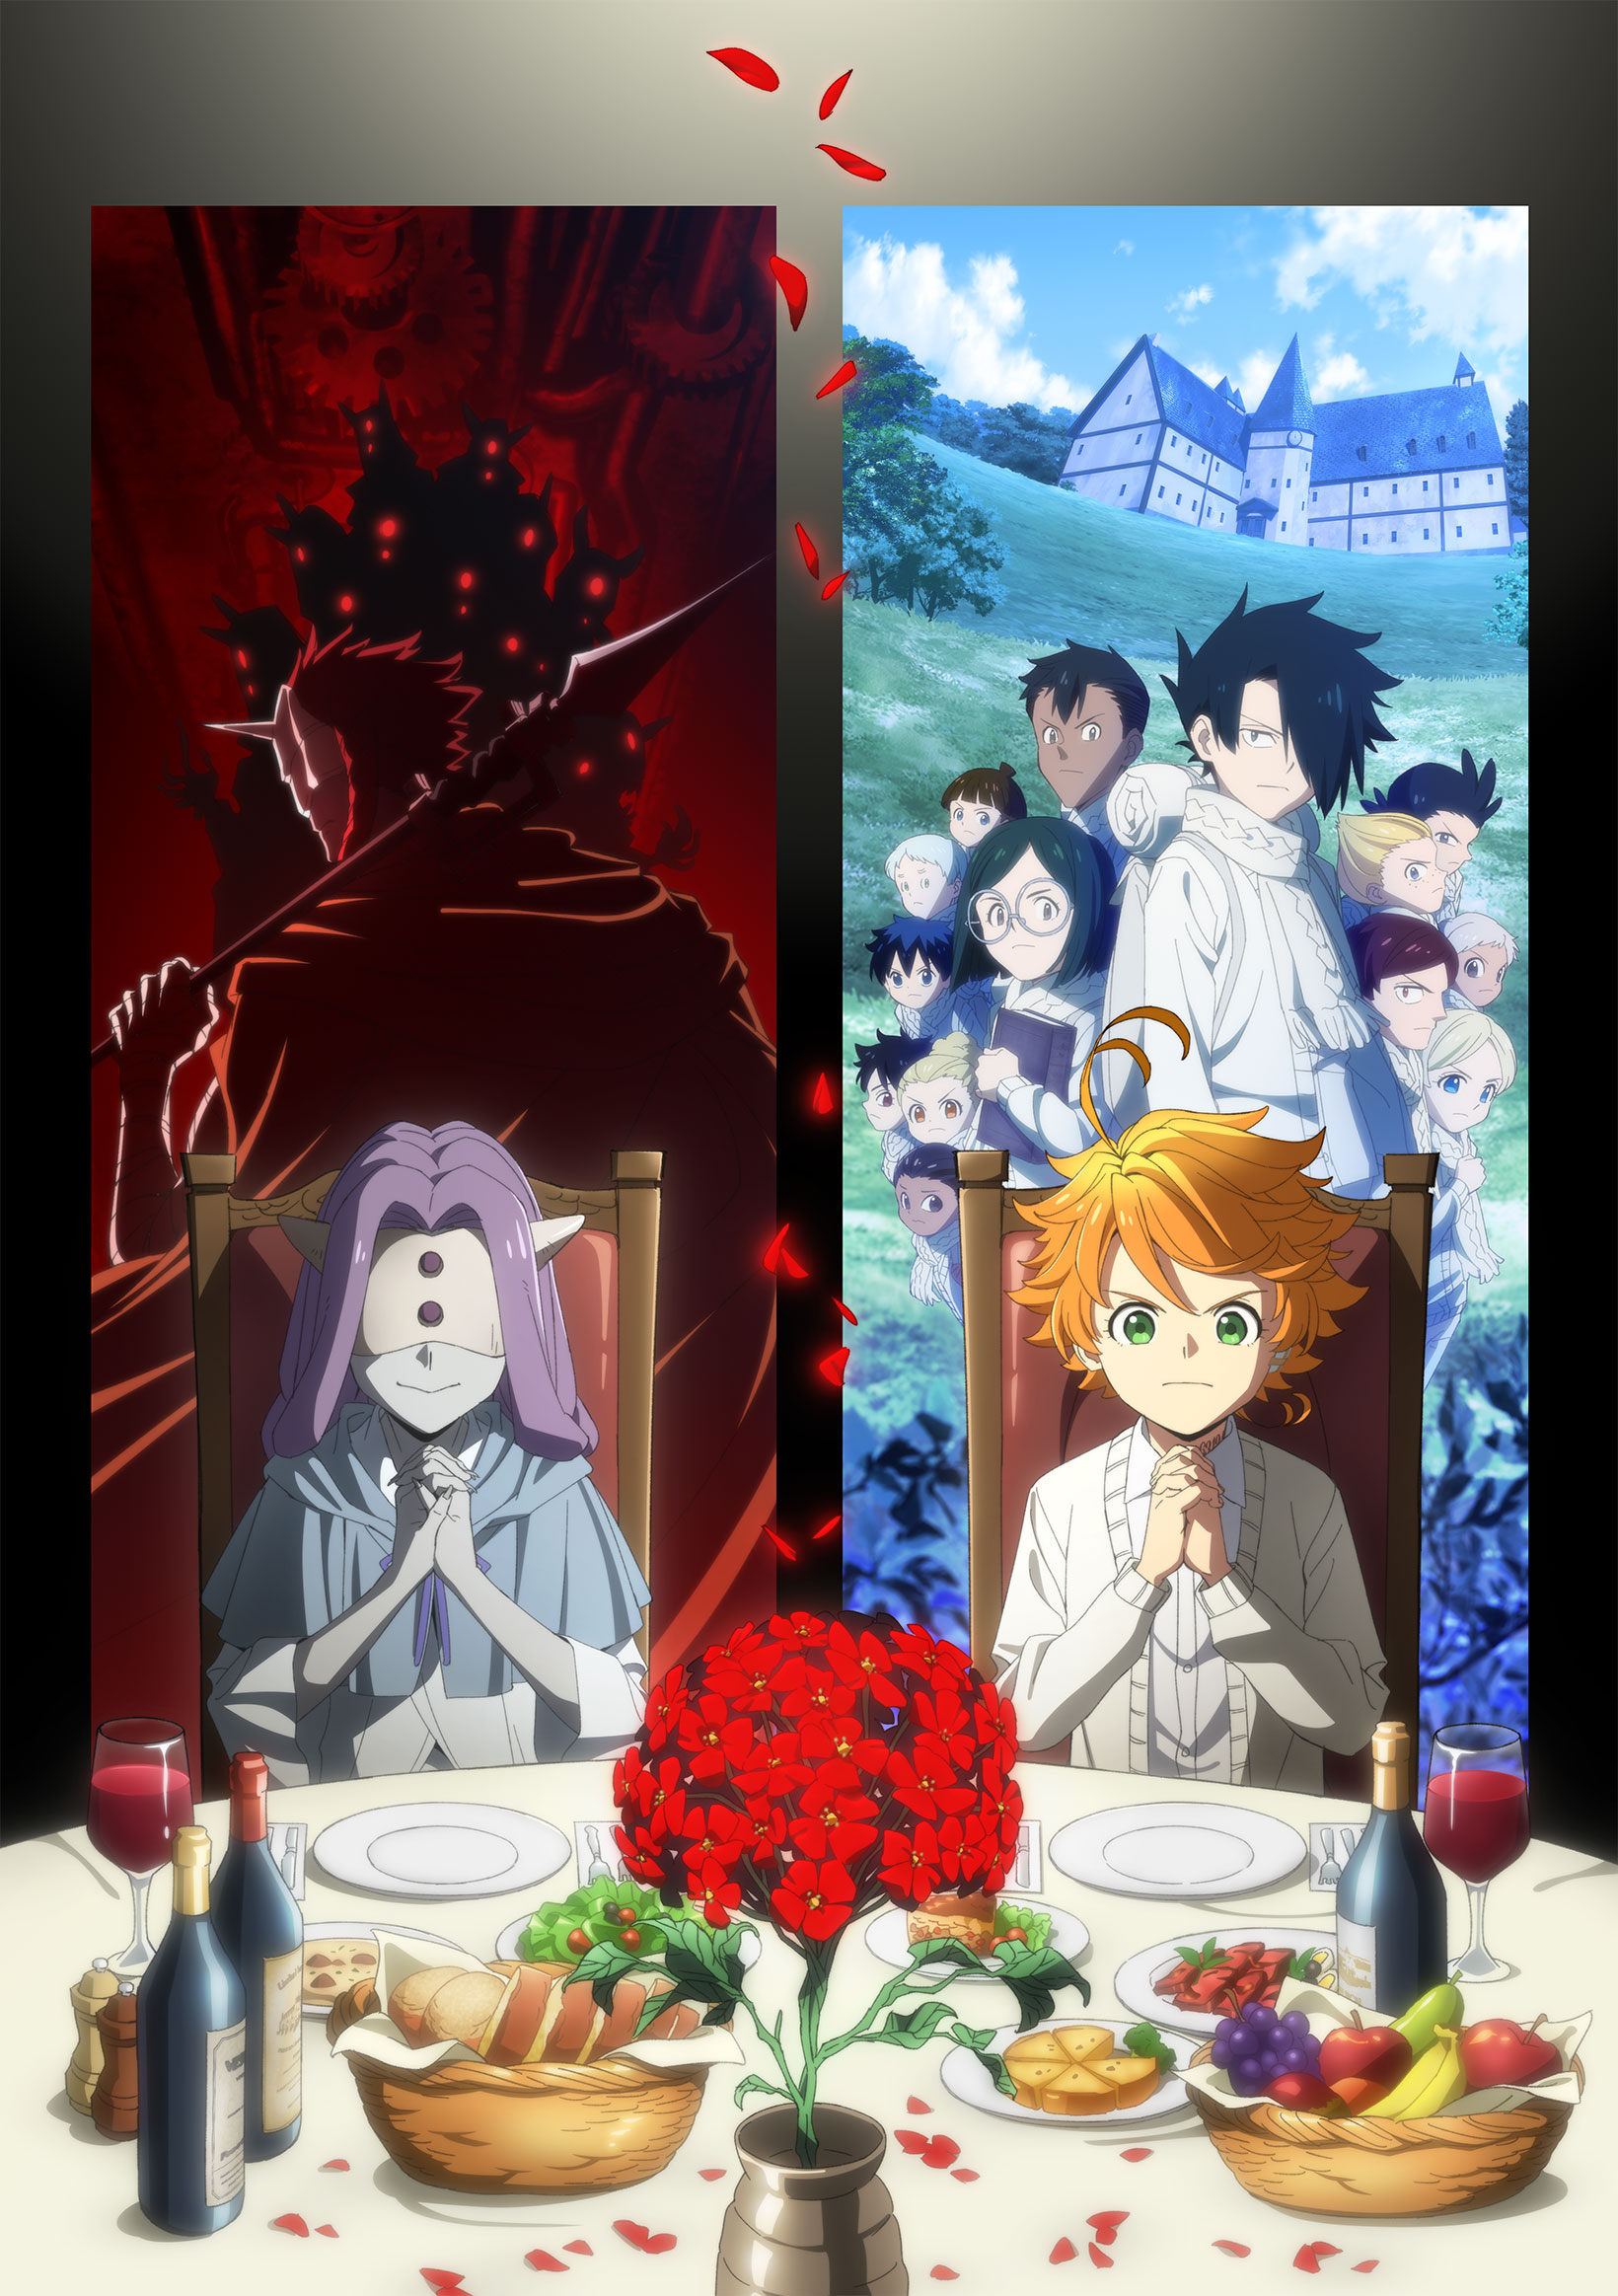 The Promised Neverland: Pôster traz o visual dos personagens na